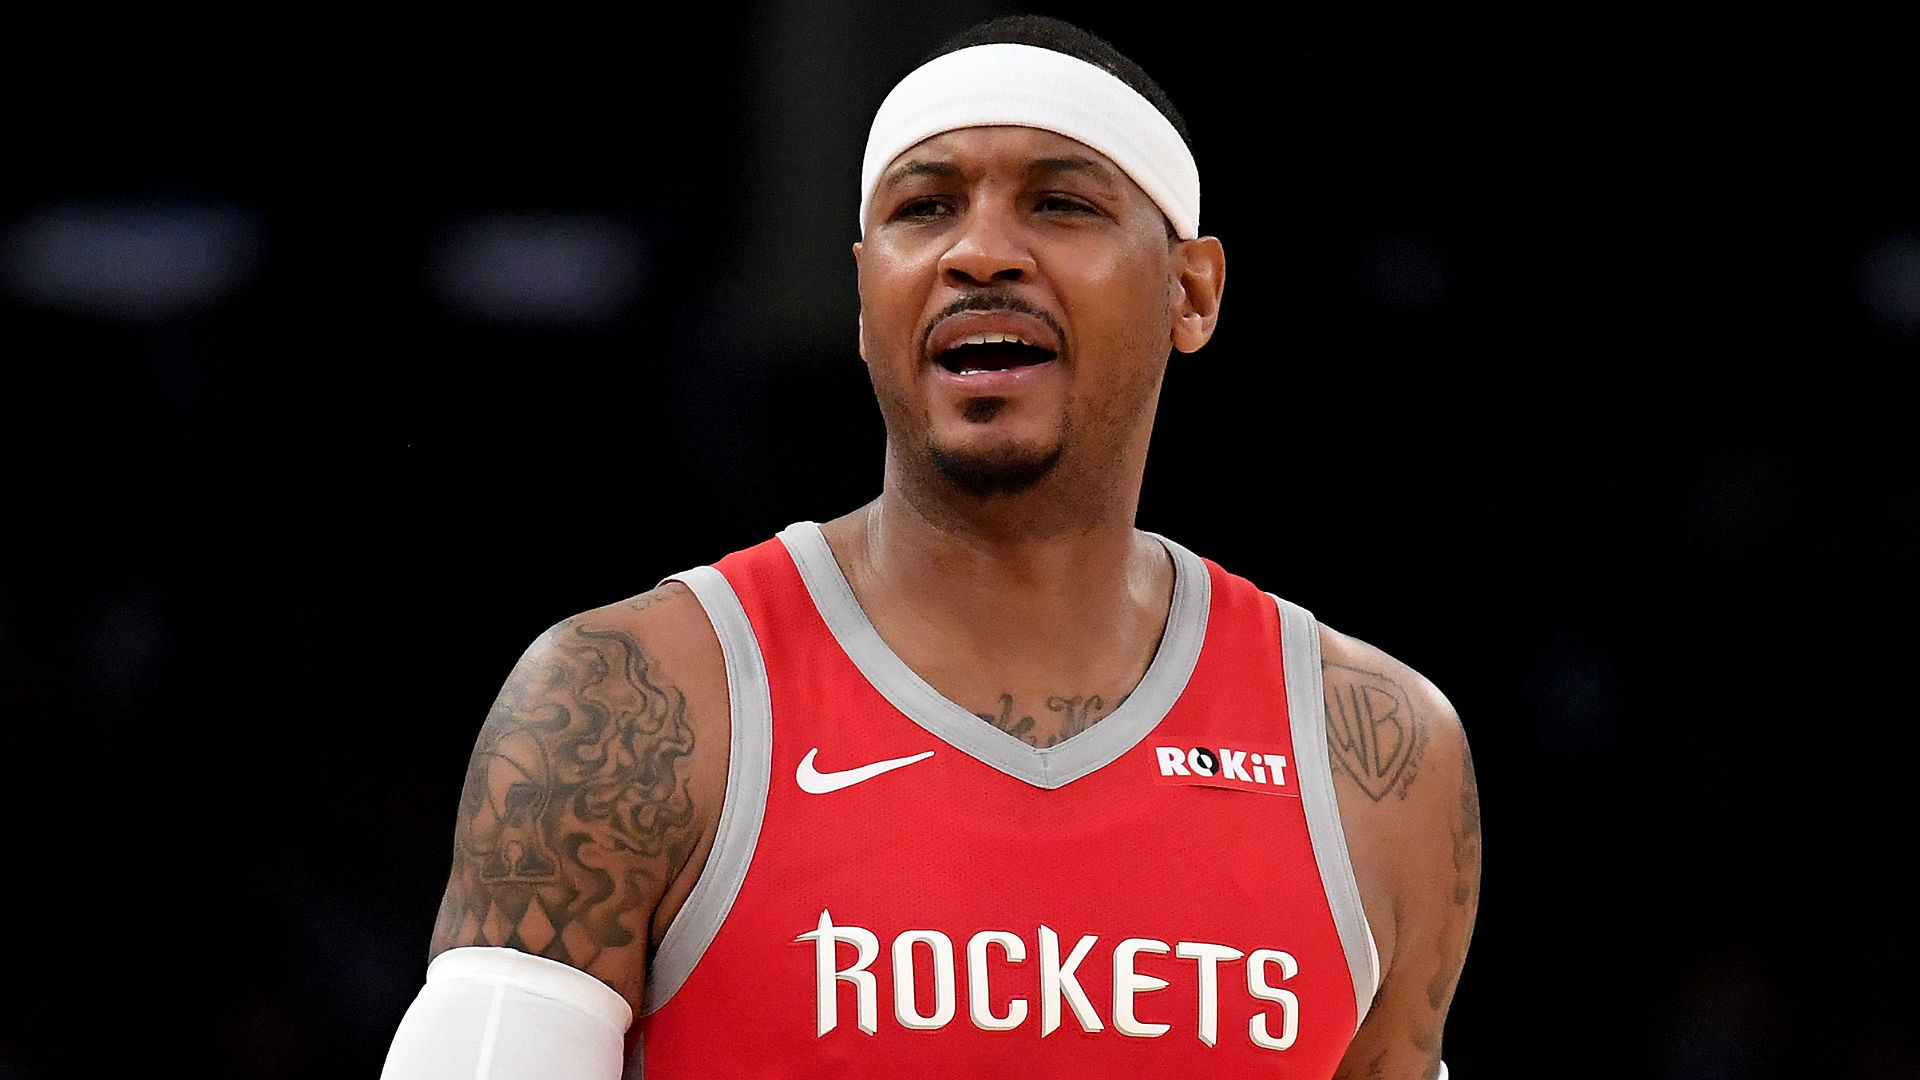 Carmelo Anthony's former team-mate Chauncey Billups offered an insight into why the star is yet to sign with an NBA team.